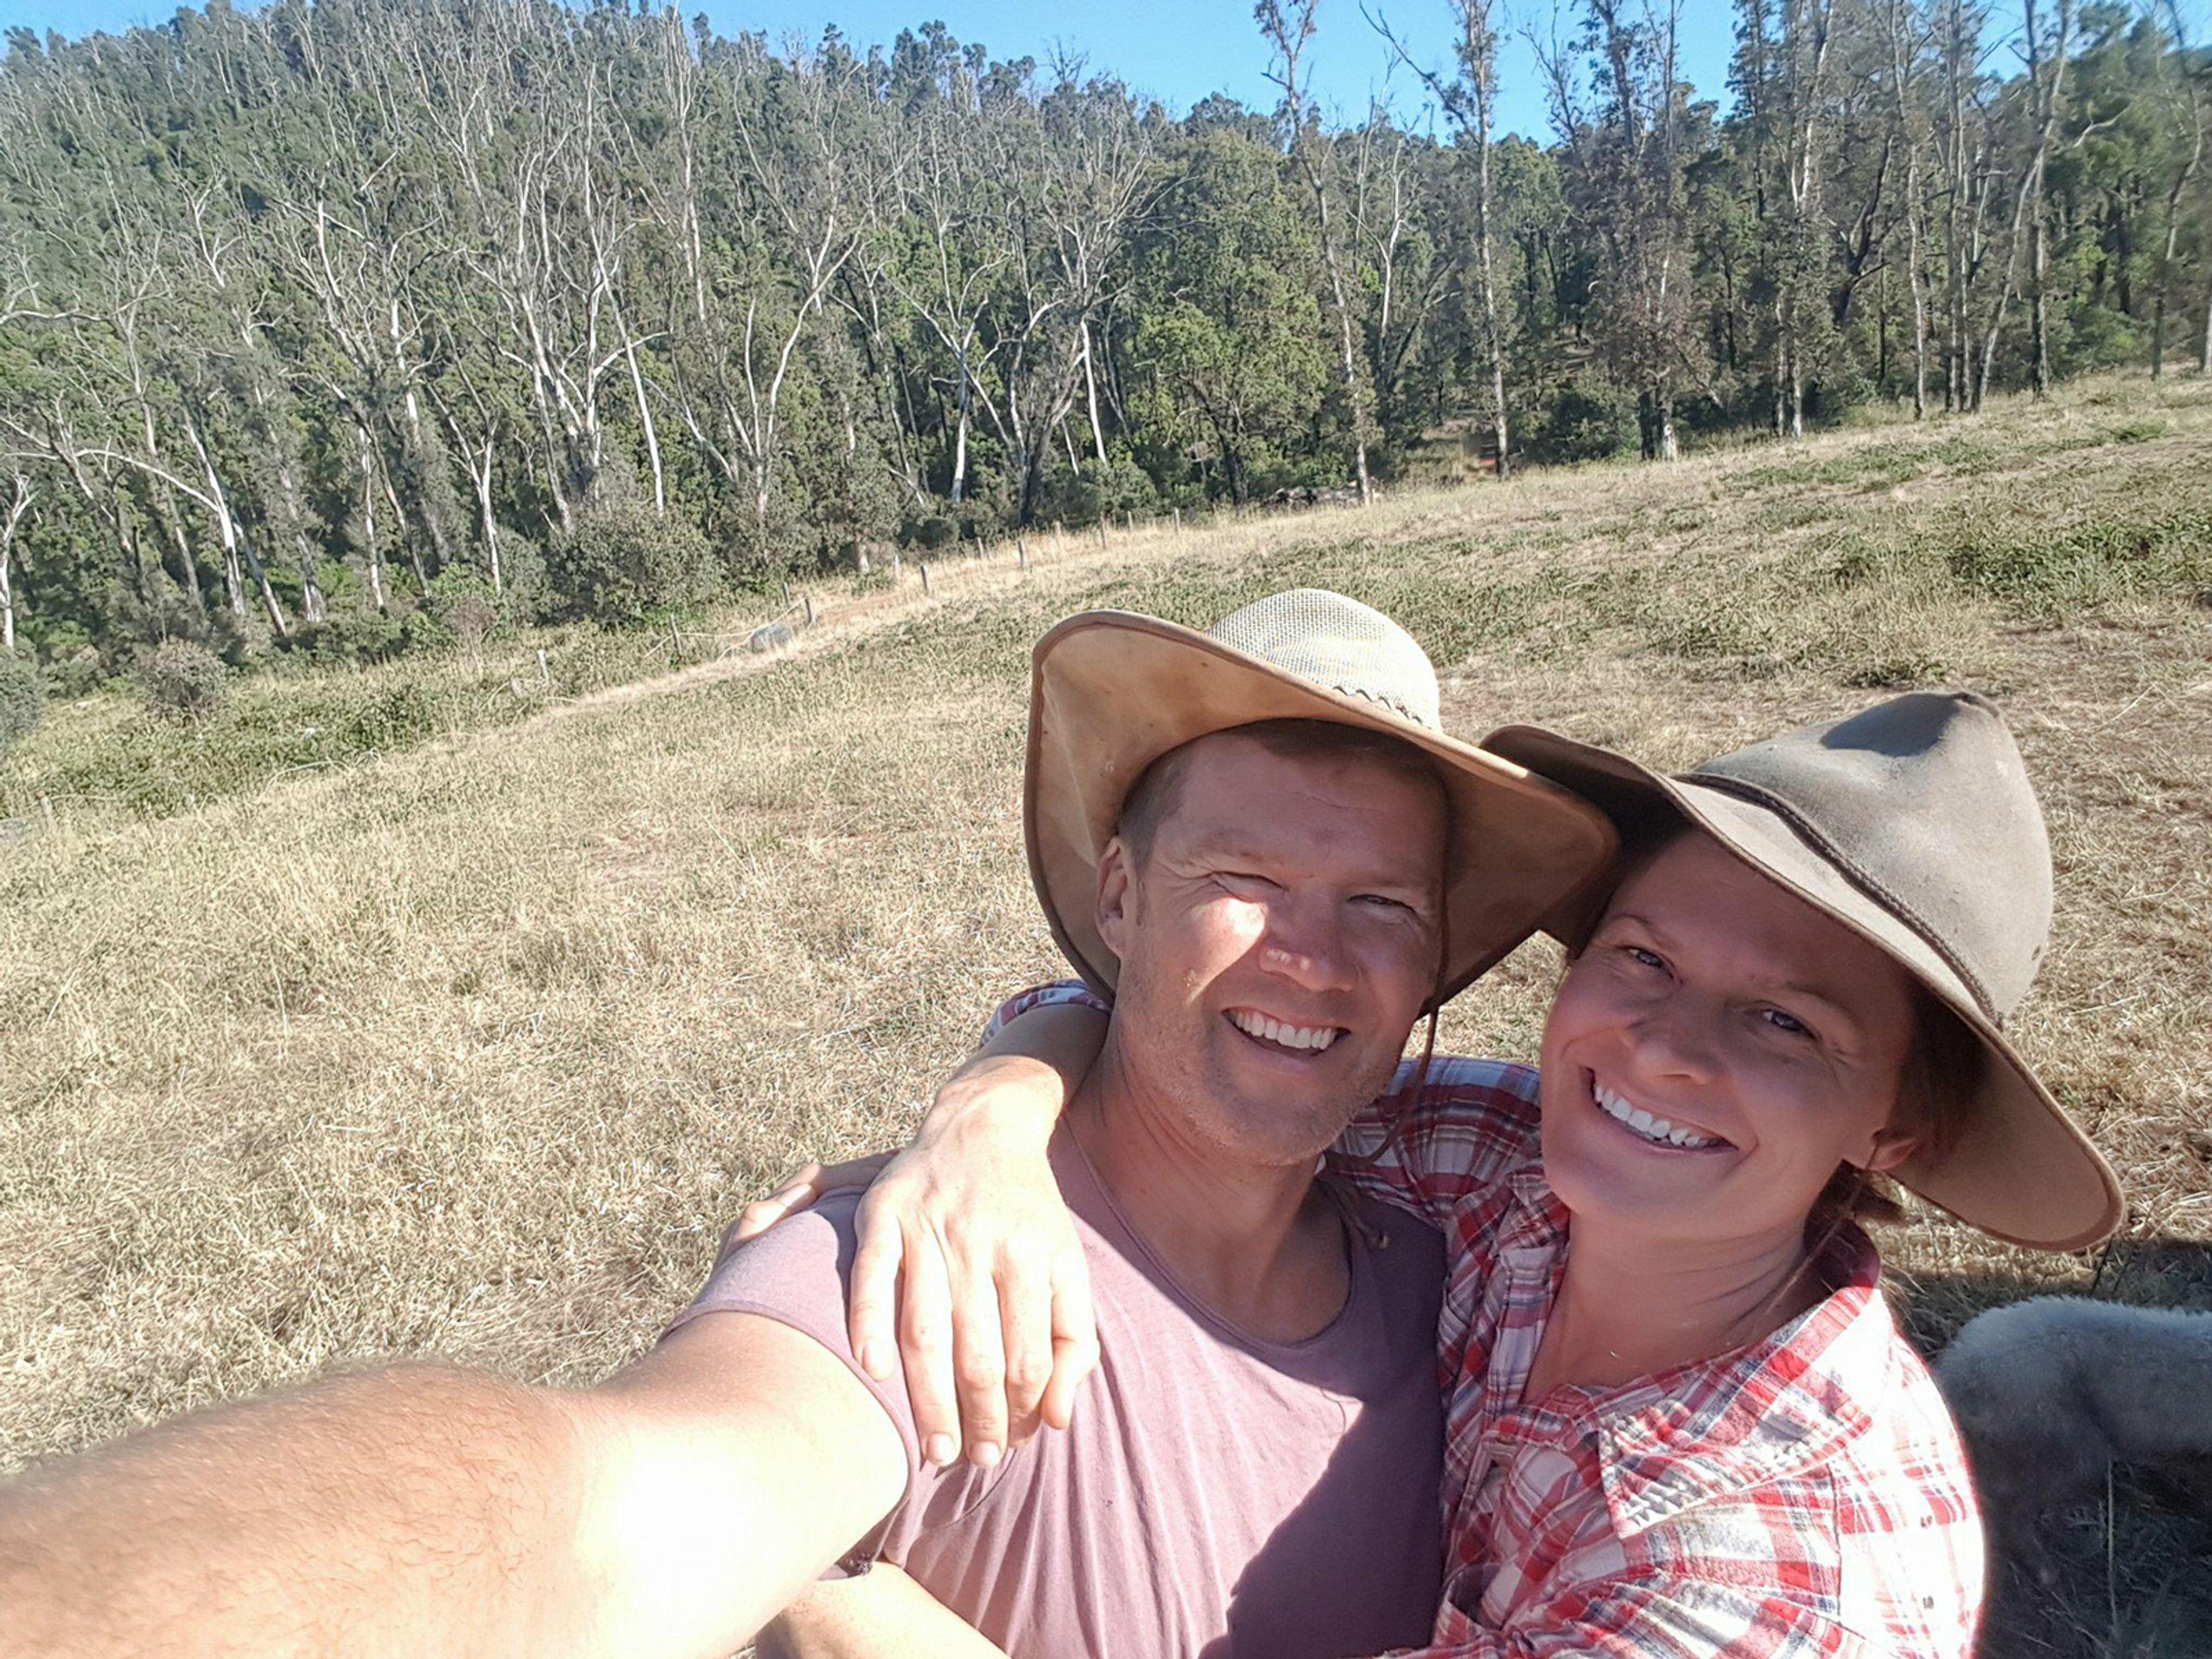 Two people taking a selfie in a paddock on a sunny day. The sky is blue and there are a lot of trees in the background next to the paddock. The people are smiling and hugging.